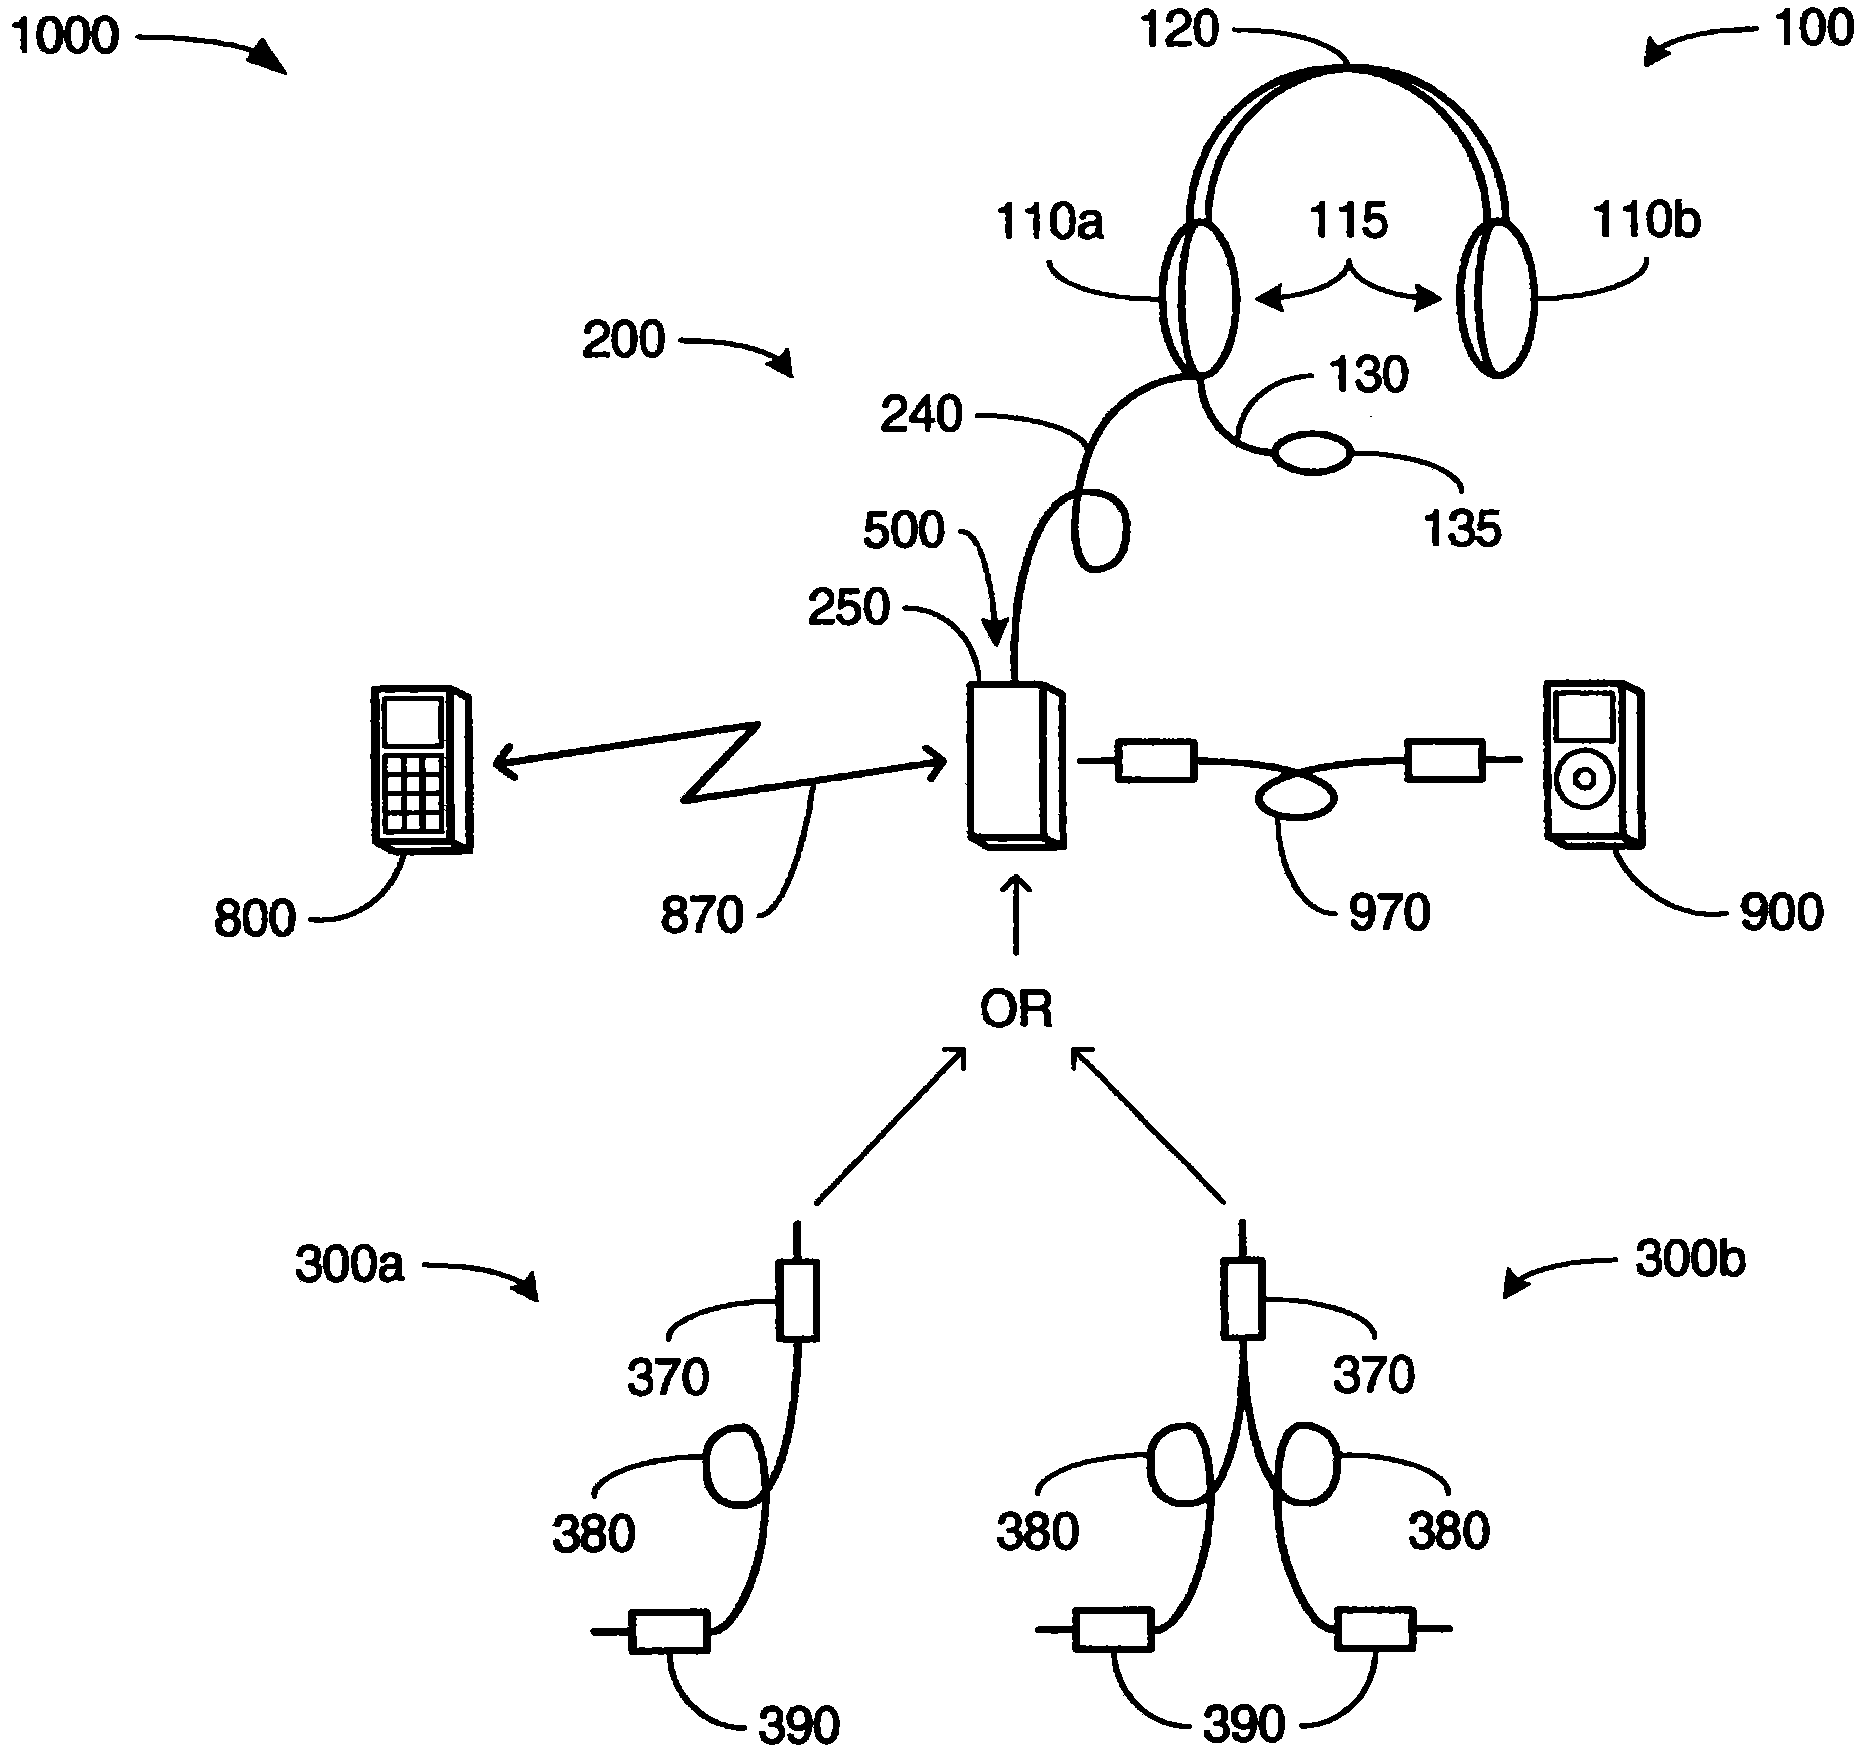 Intercom headset connection and disconnection